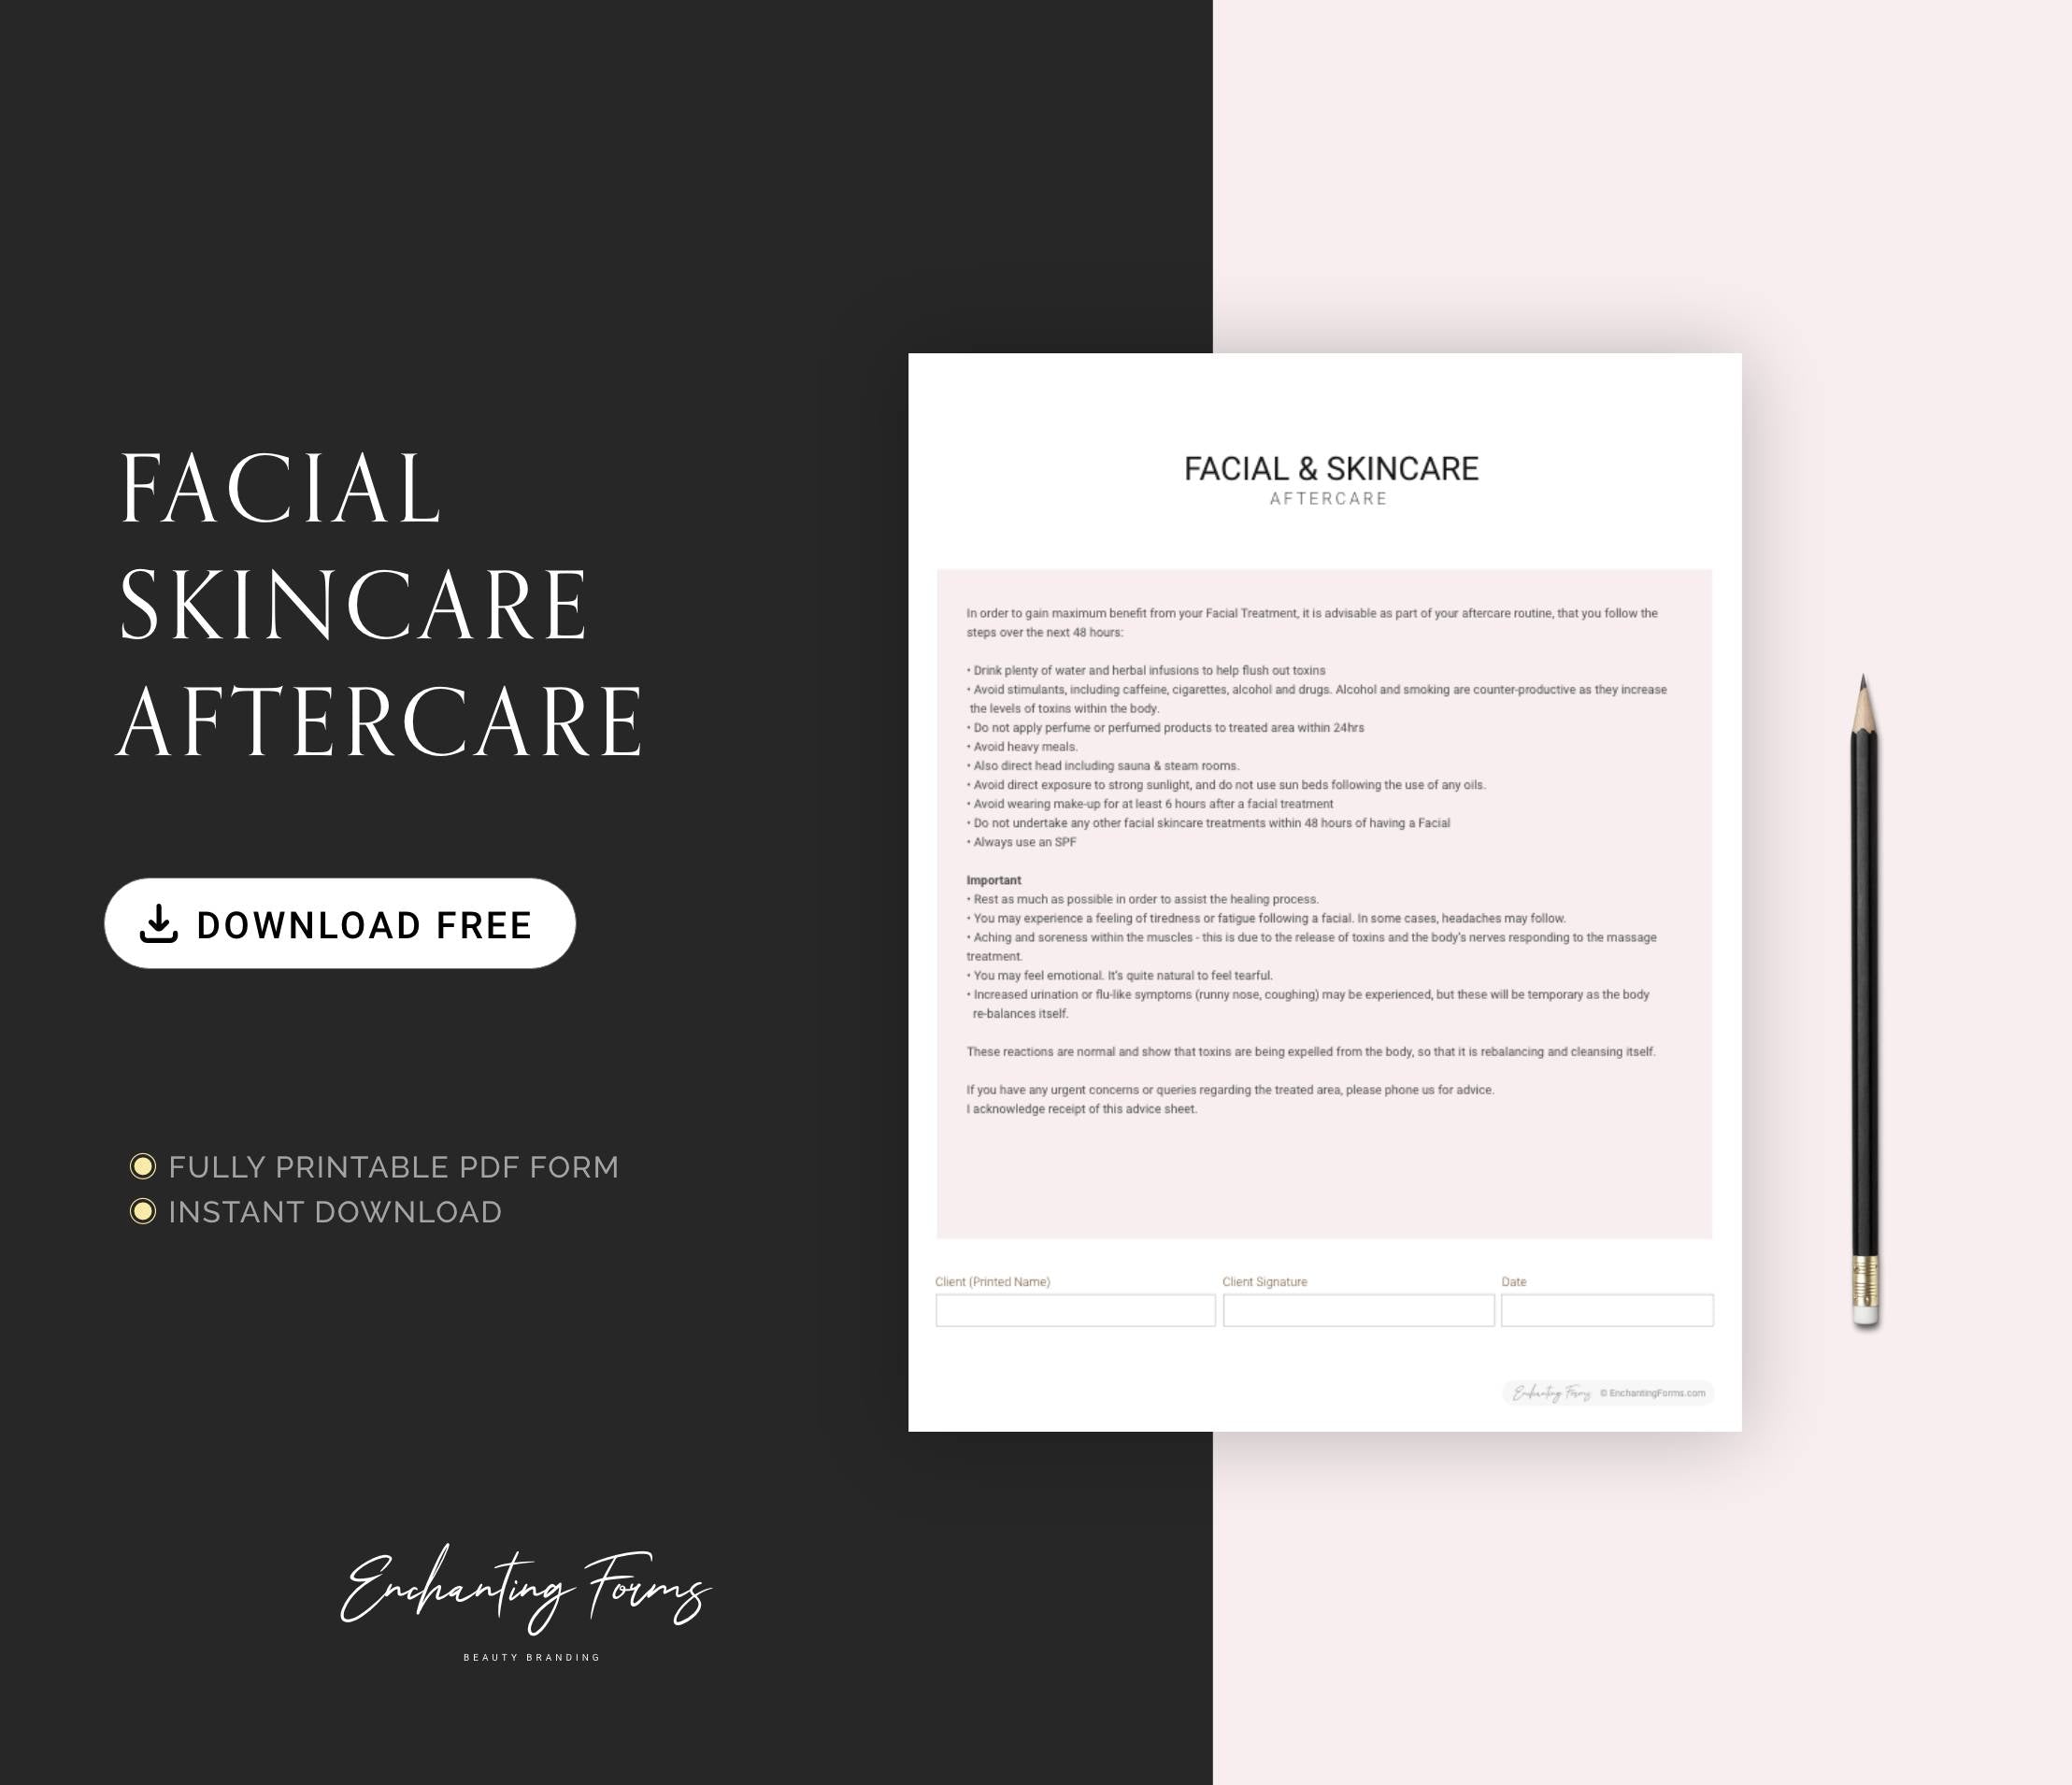 Facial skincare aftercare free download